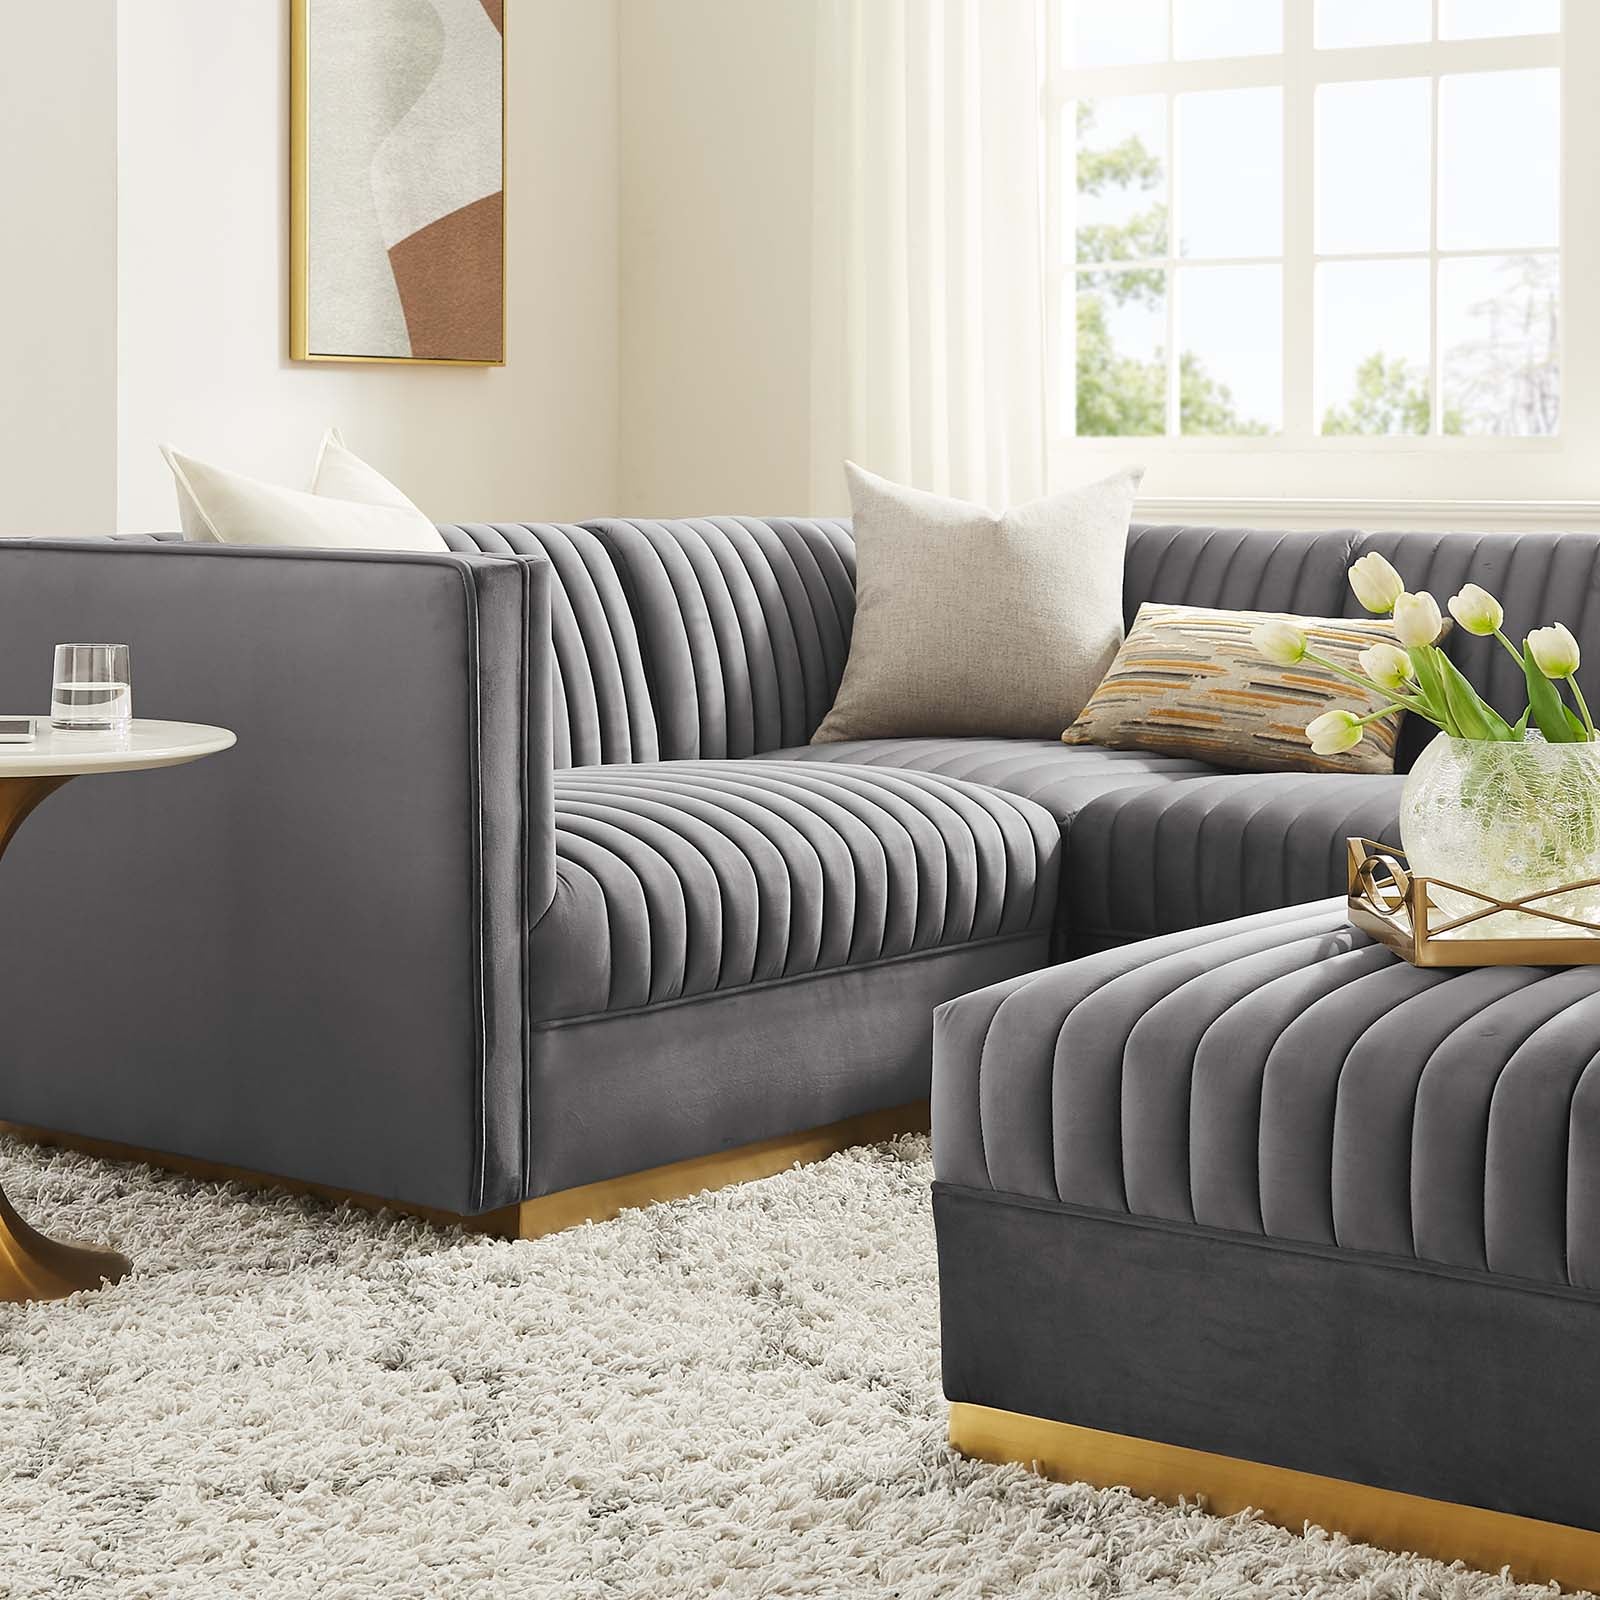 Modway Sectional Sofas - Sanguine Channel Tufted Performance Velvet 5 Piece Left-Facing Modular Sectional Sofa Gray